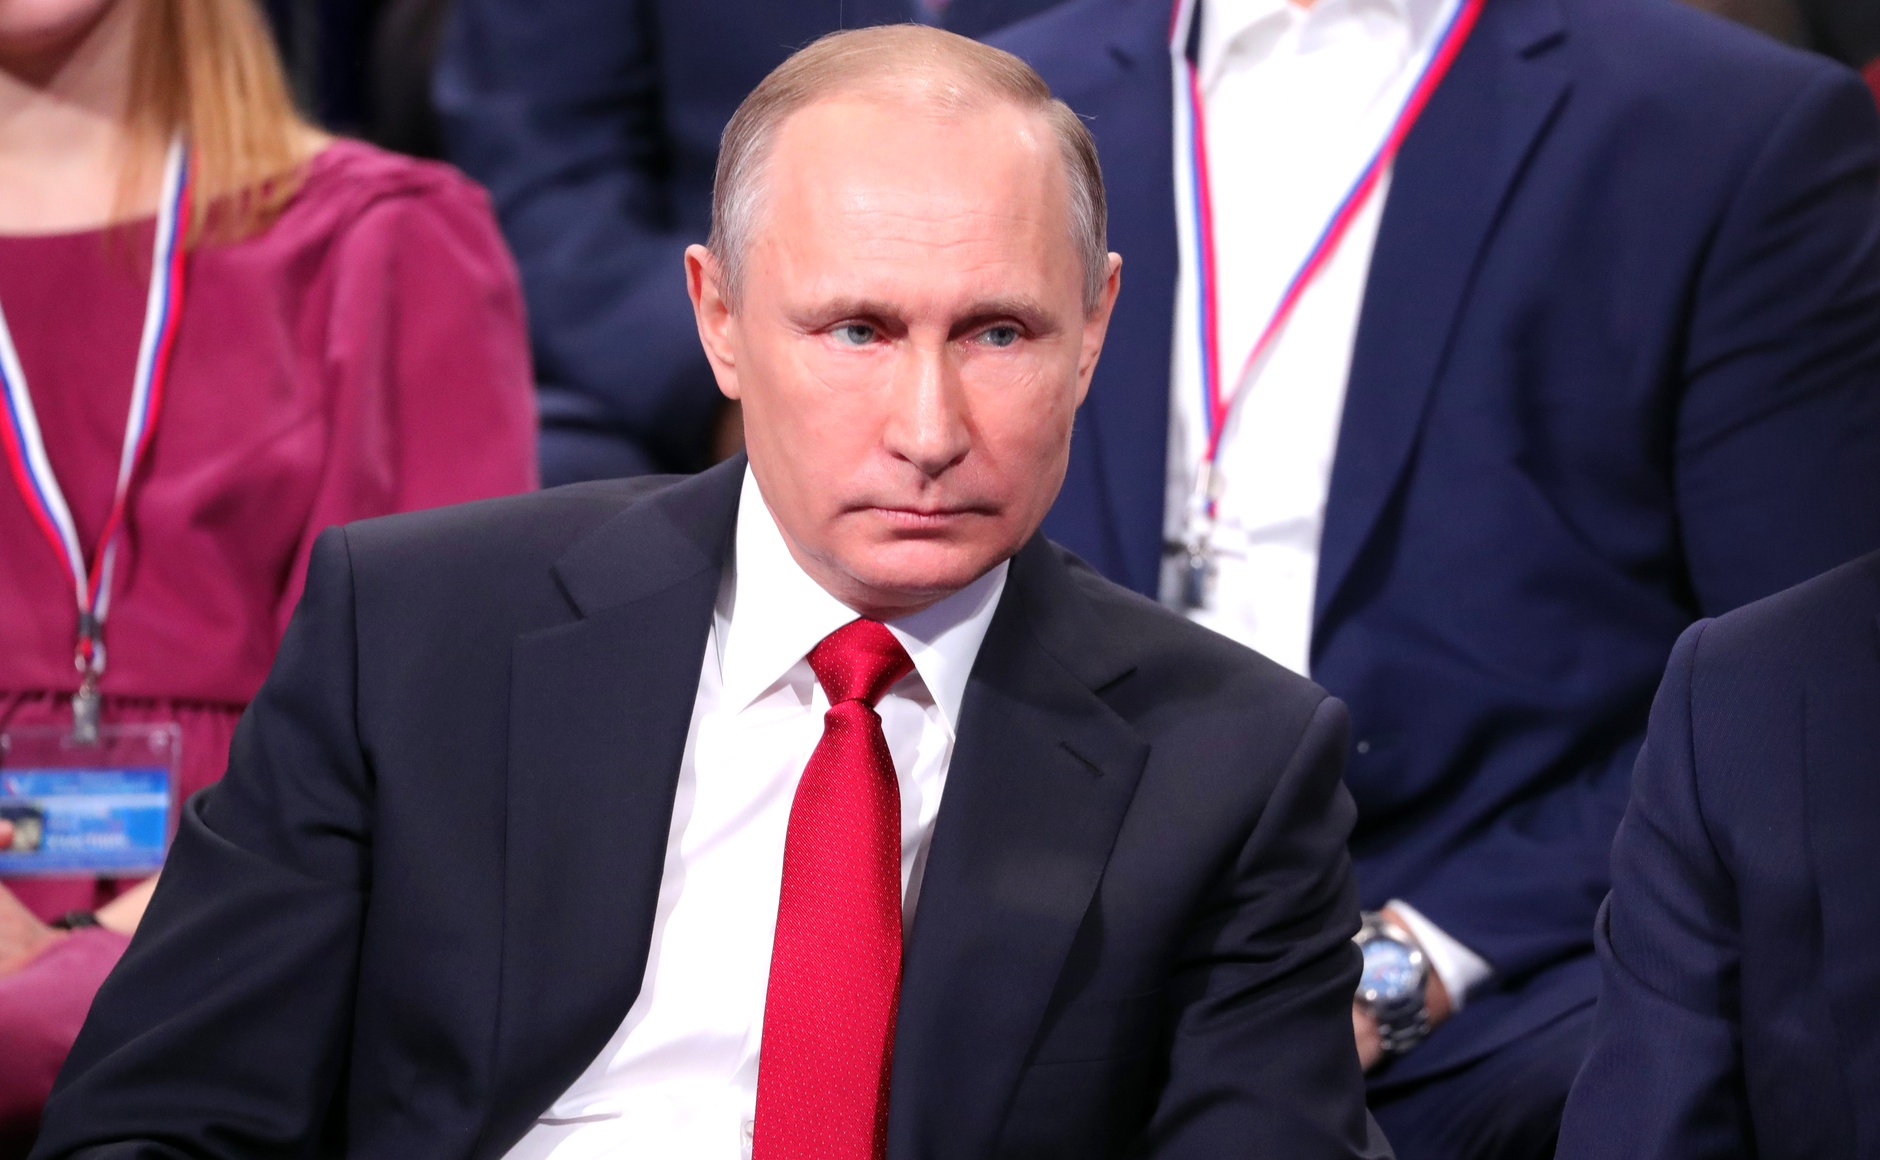 Putin compared Washington’s handling of events following the recent chemical attack in Syria to the U.S.’s much maligned approach to Iraq in 2003.